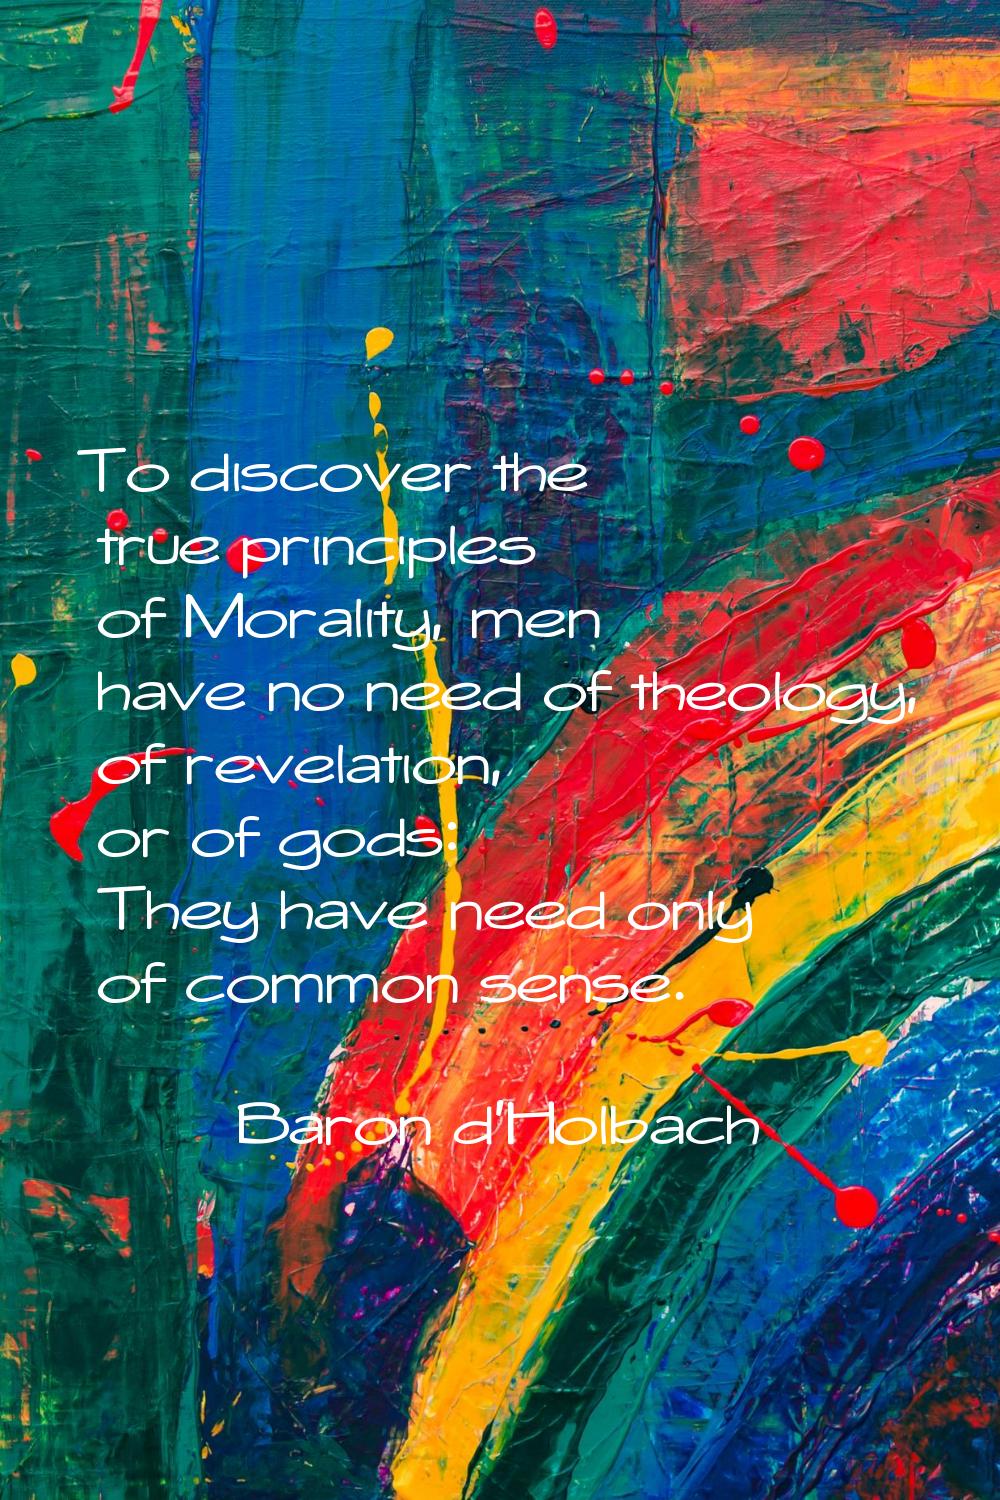 To discover the true principles of Morality, men have no need of theology, of revelation, or of god